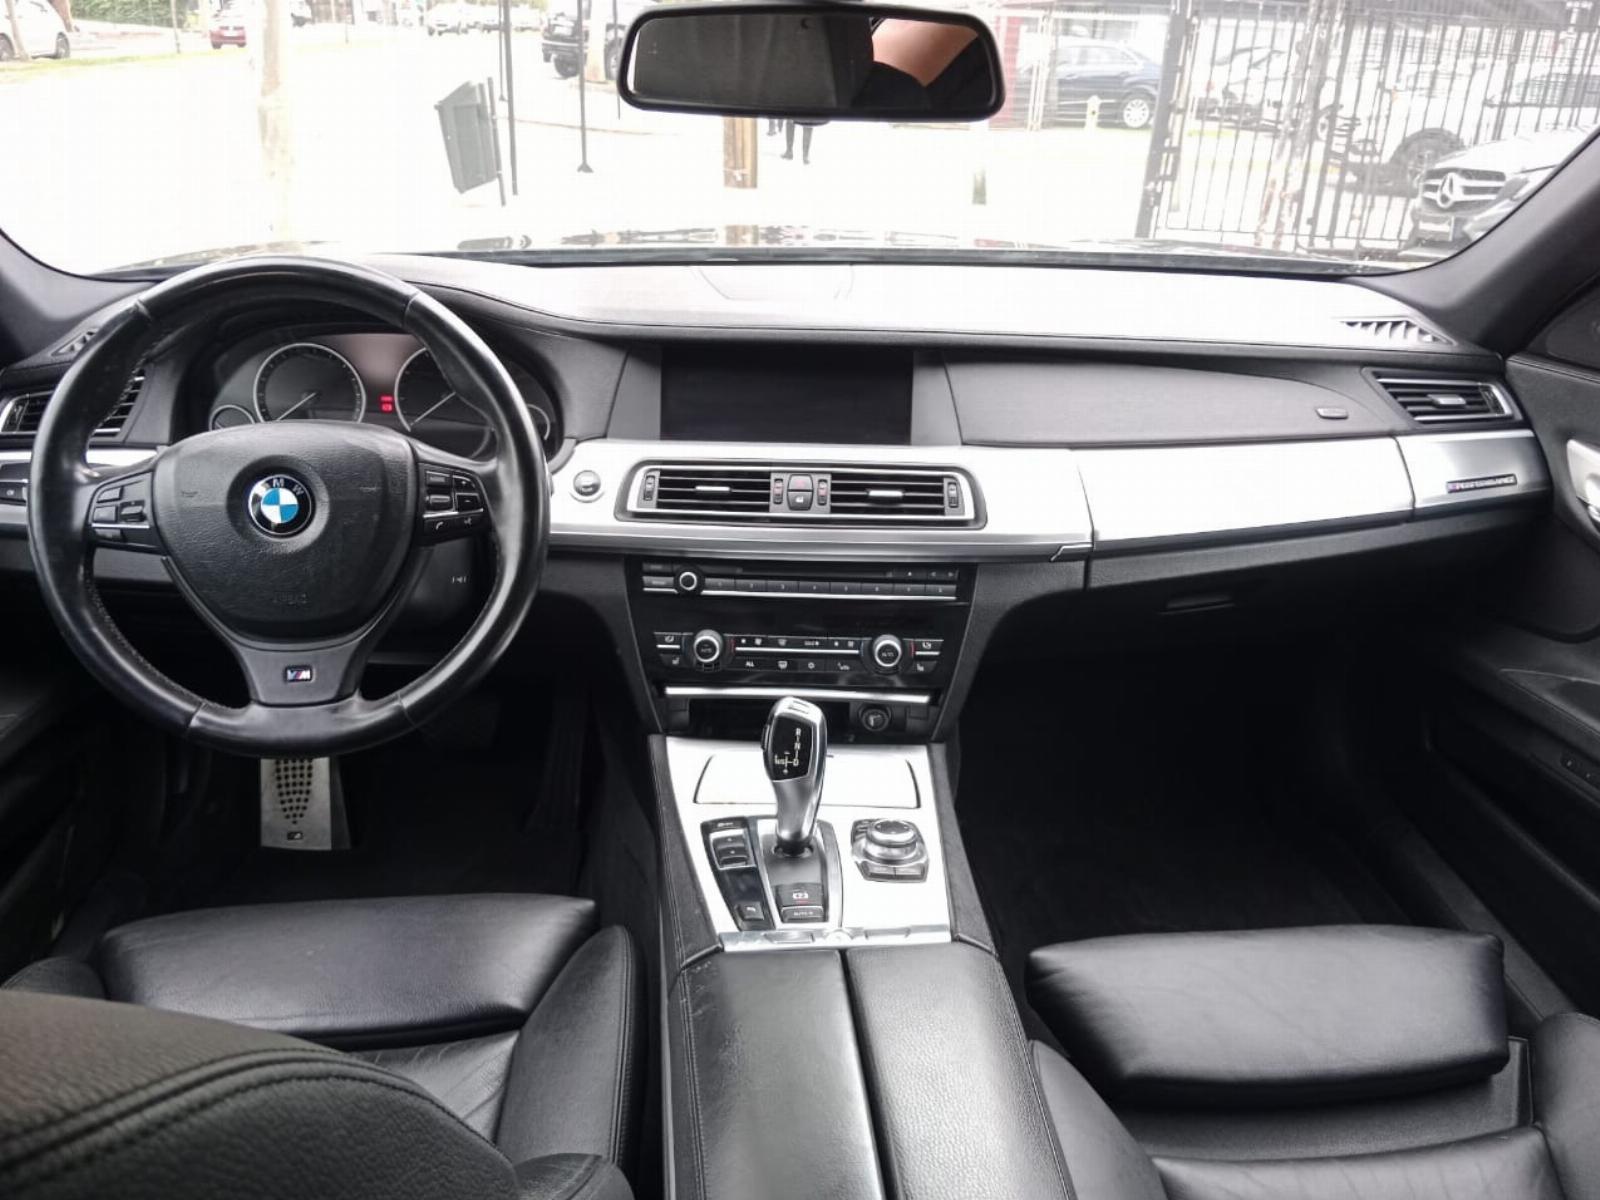 BMW 730 730 I Auto 2013 Impecable  - KENNEDY AUTOMOVILES